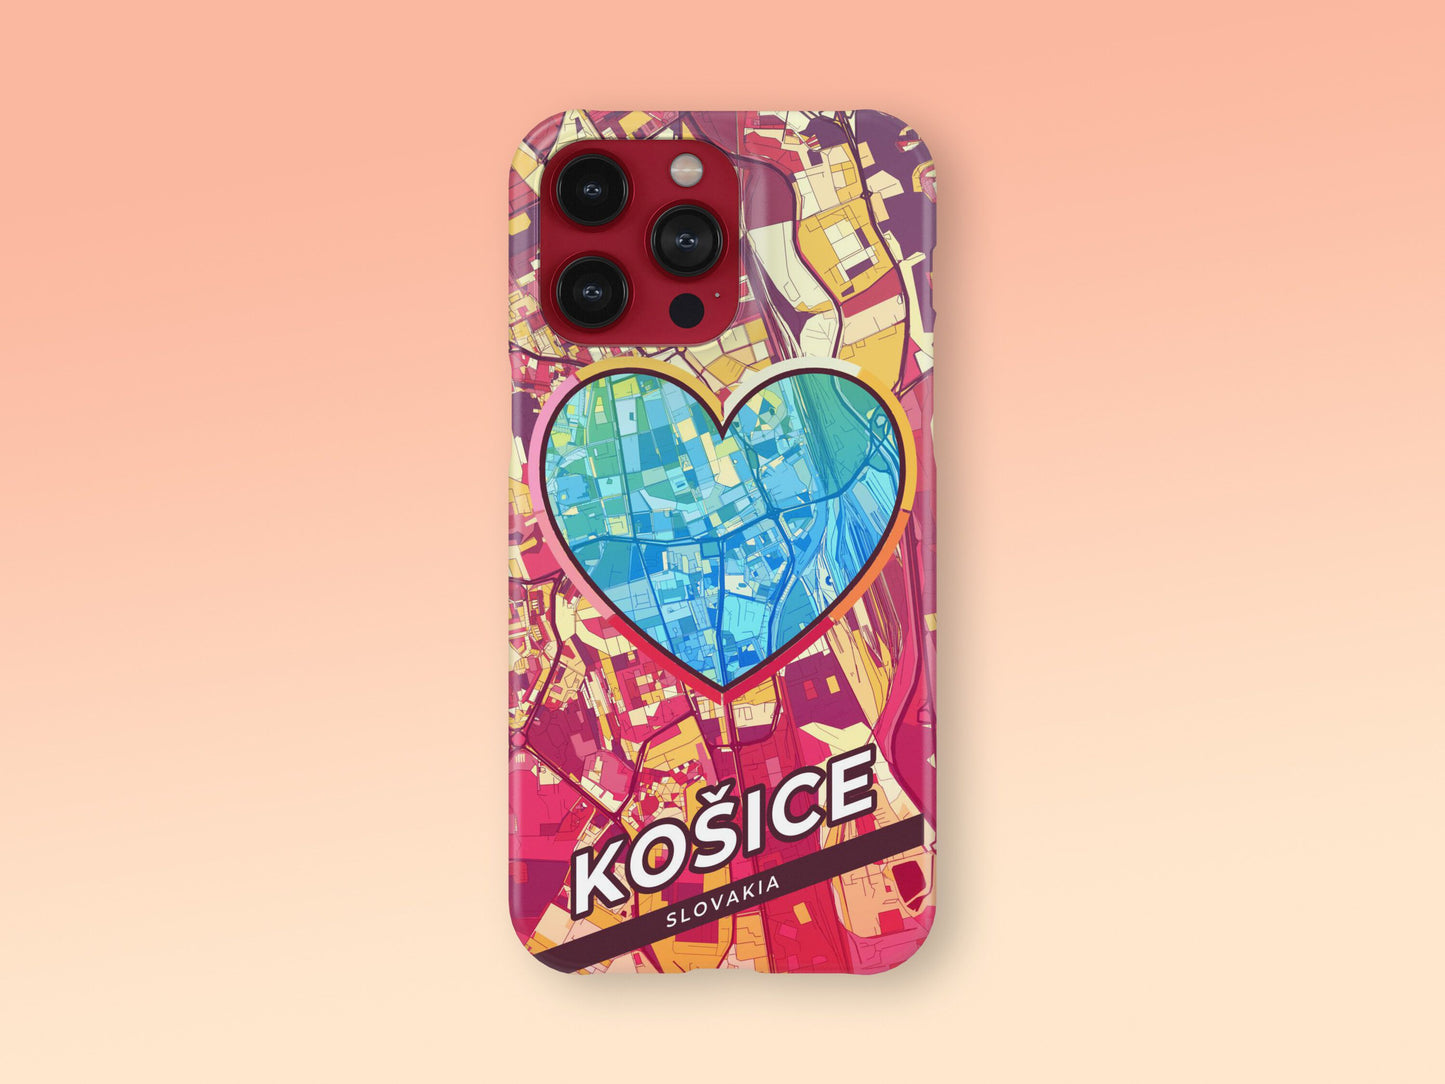 Košice Slovakia slim phone case with colorful icon. Birthday, wedding or housewarming gift. Couple match cases. 2